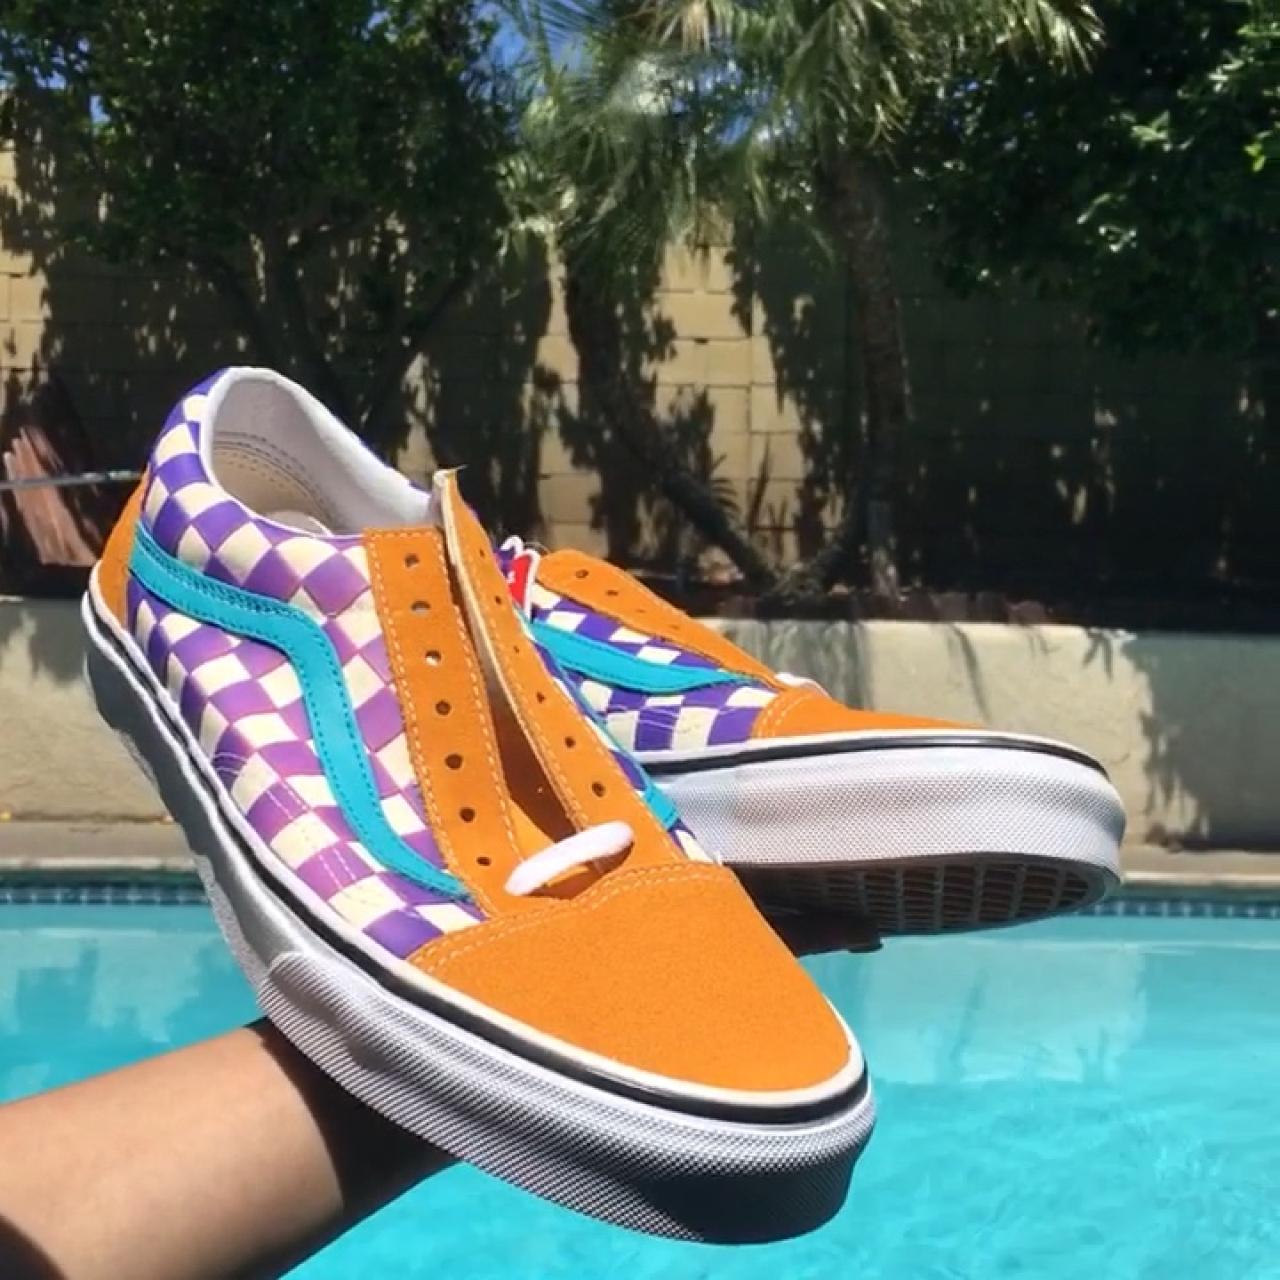 VANS Colorful 90's inspired 